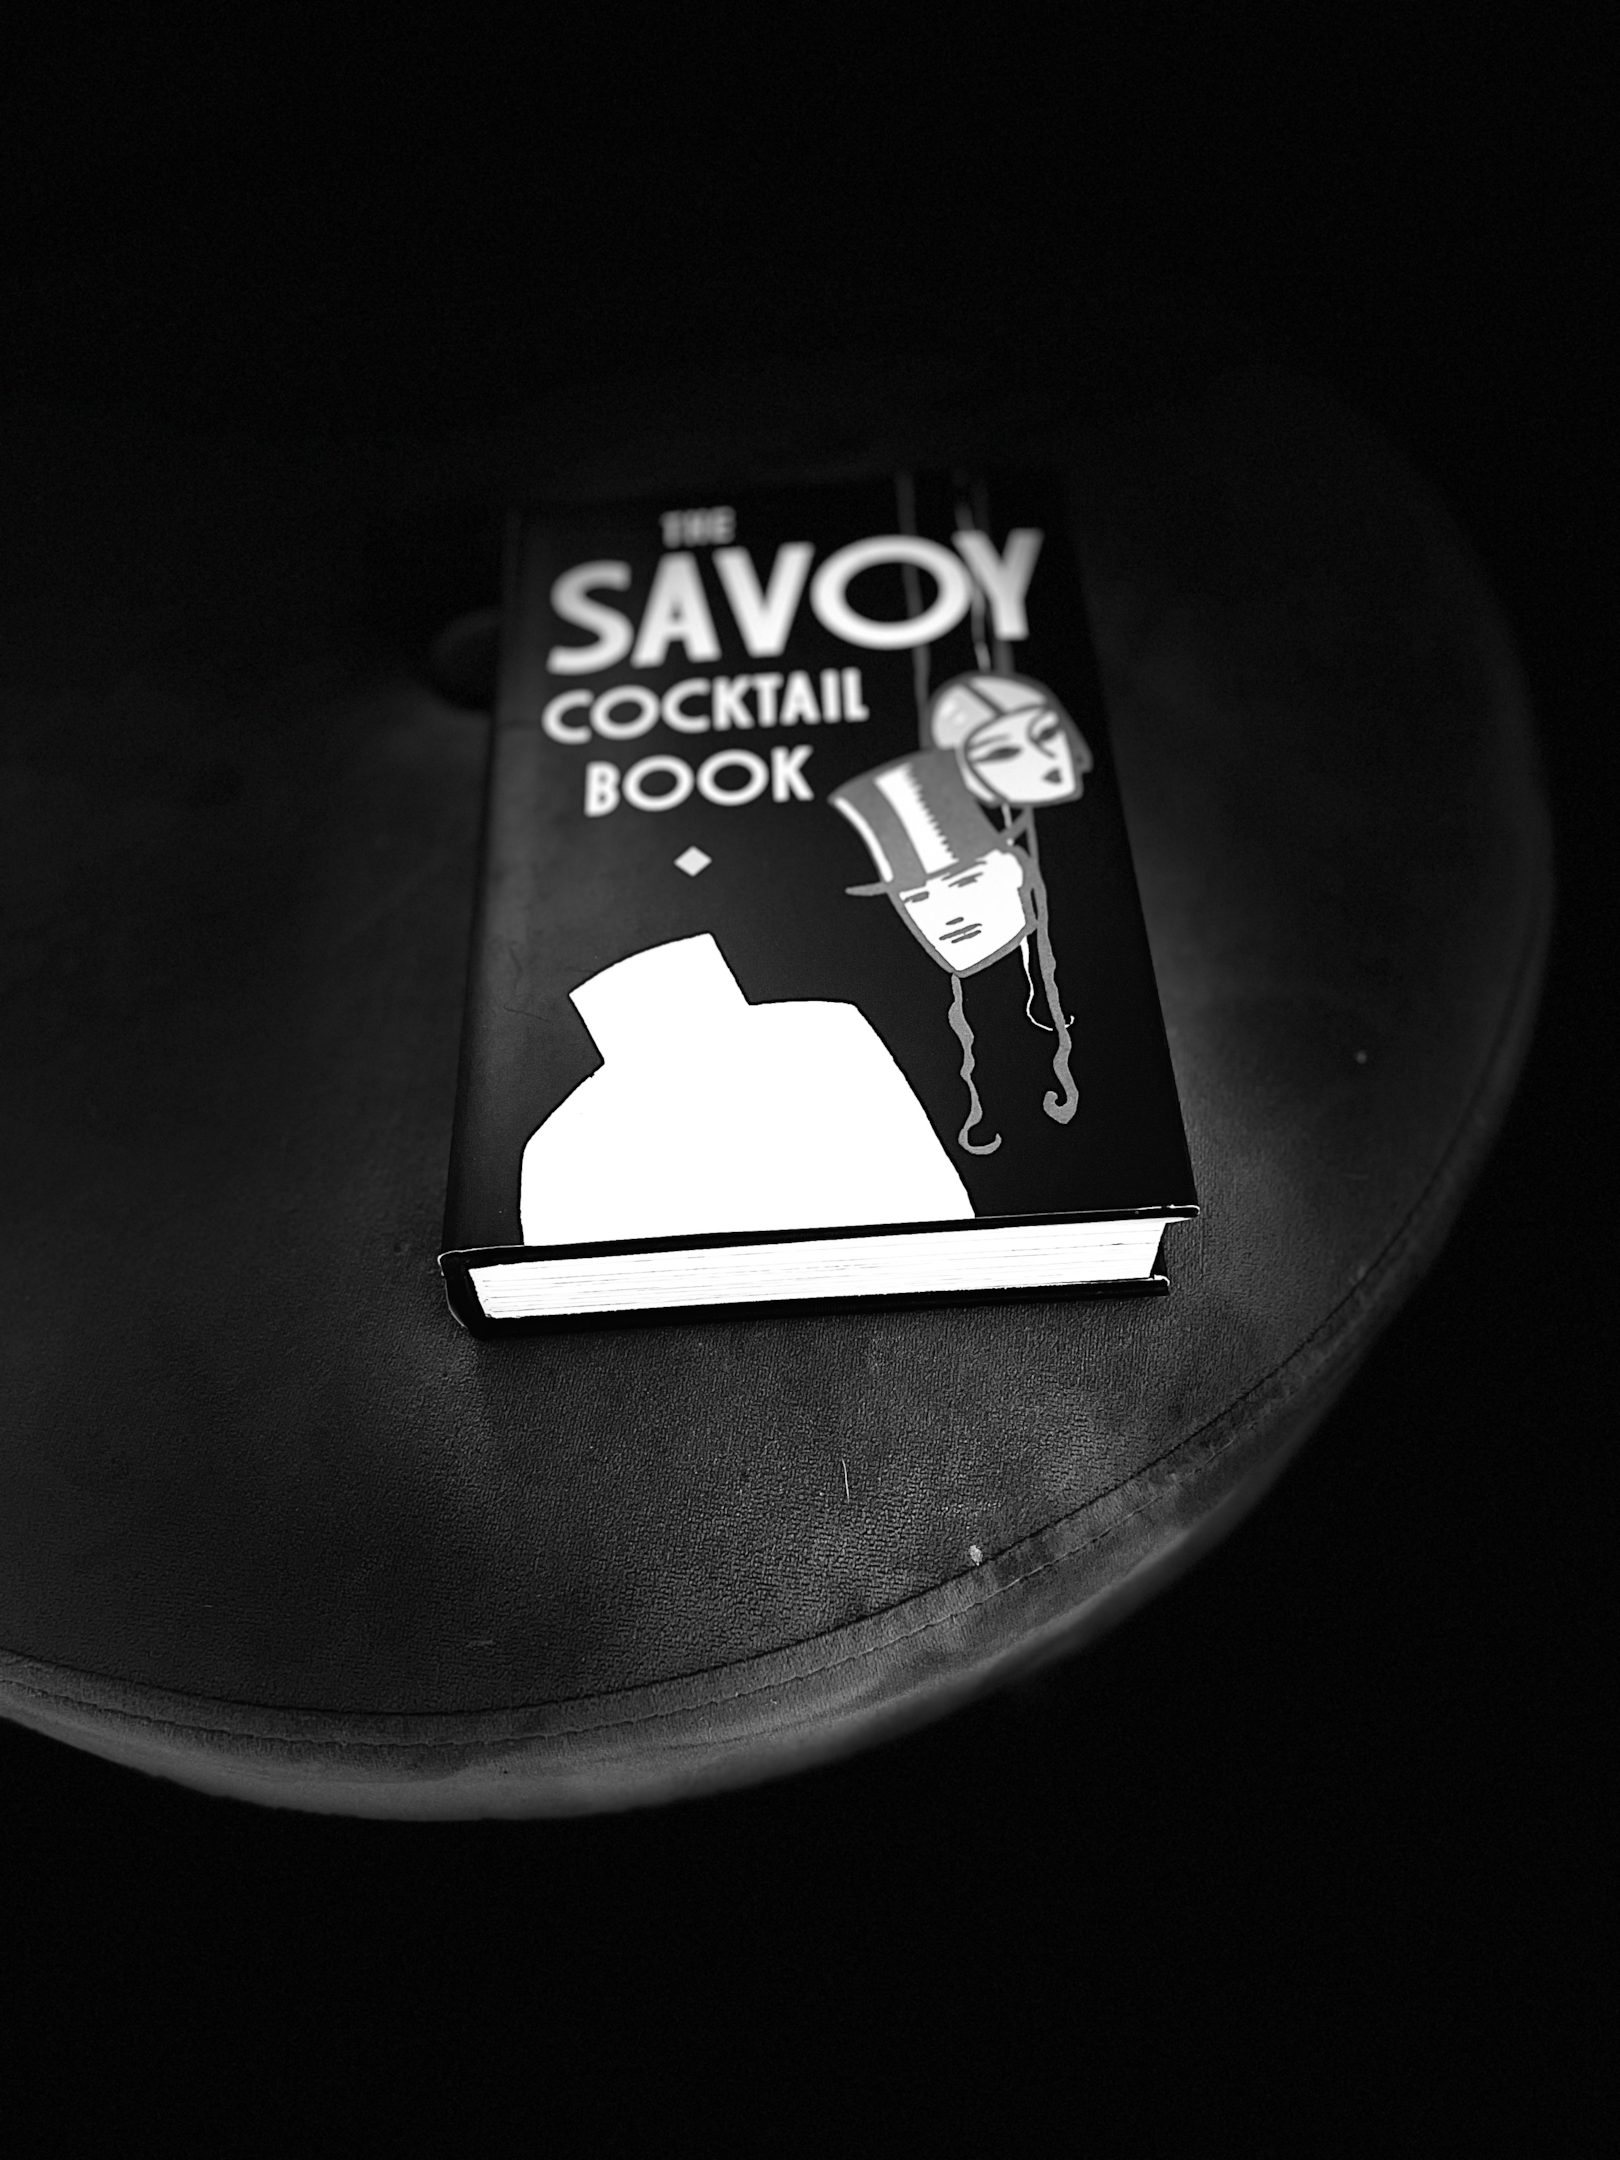 Savoy Cocktail book, Cocktail lovers book, Classic Cocktails, coffee table book